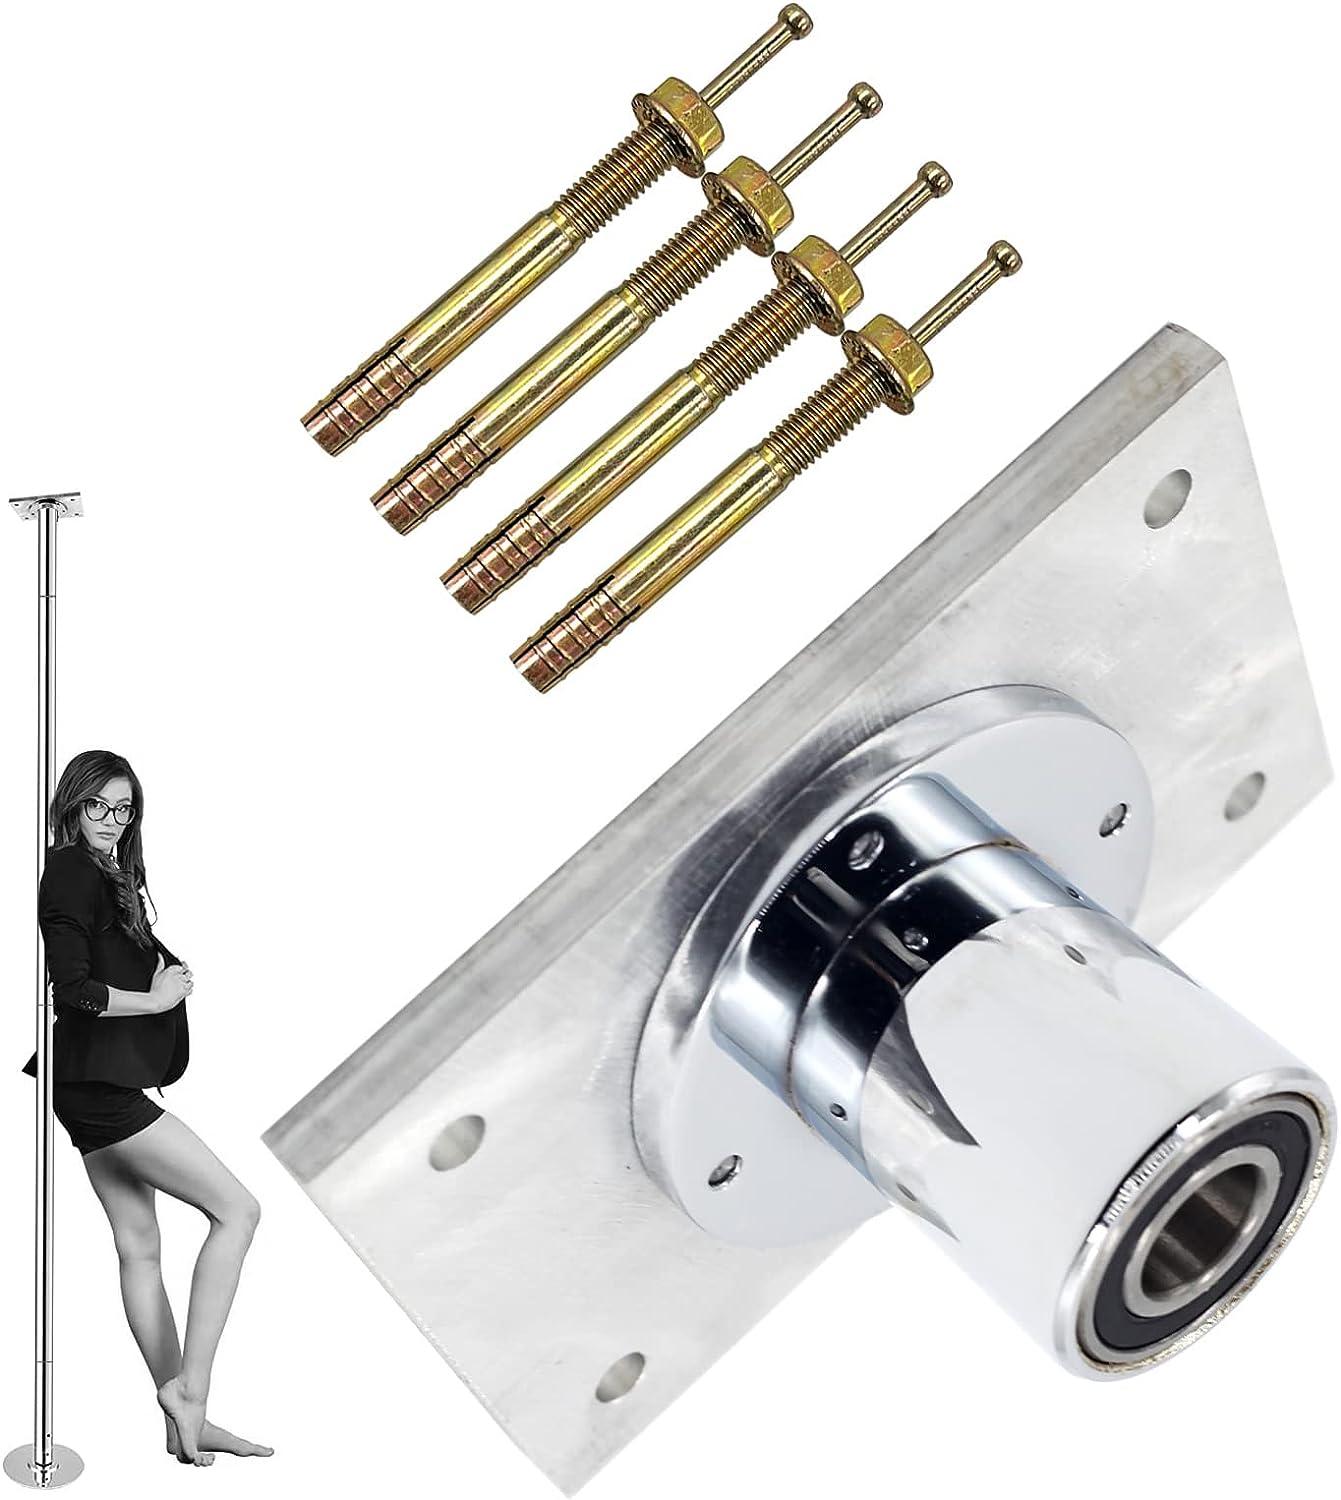 PRIORMAN Pole Extension for Pole Dancing 45mm - 125/250/500mm